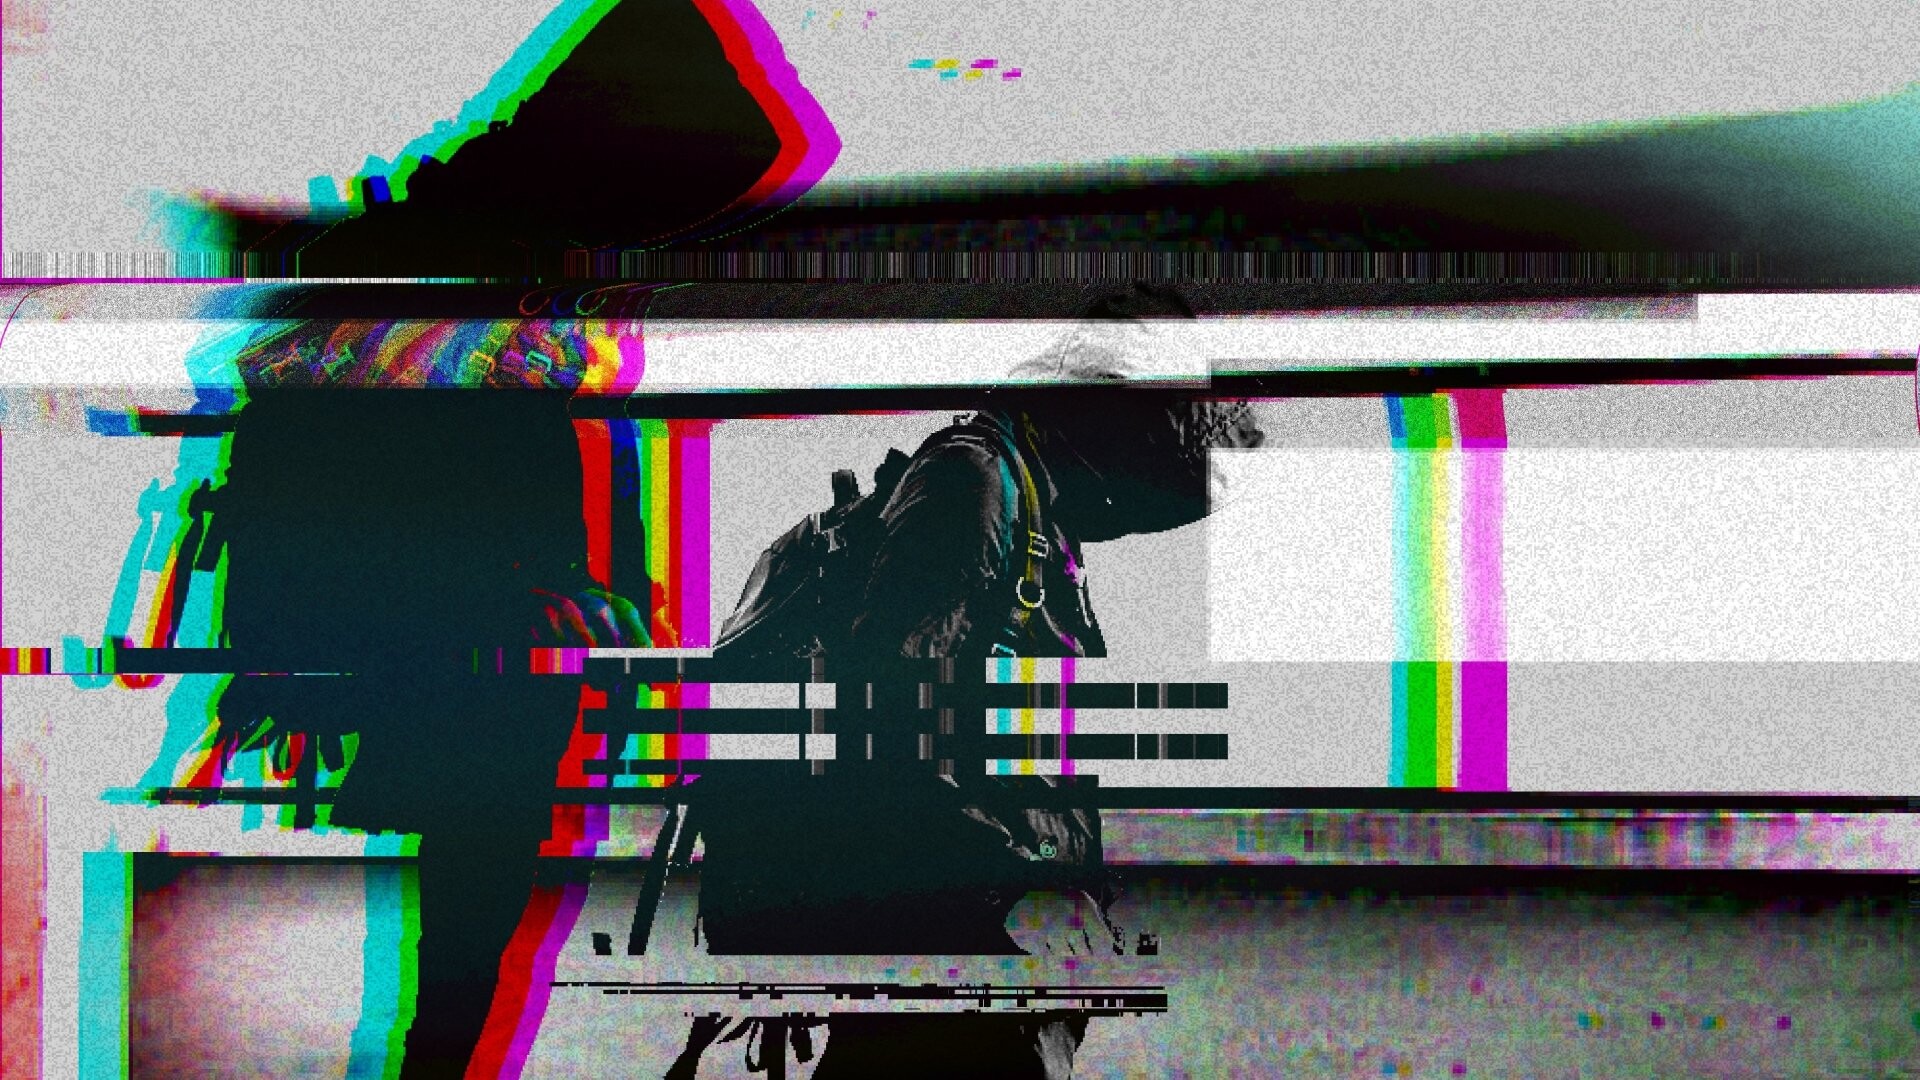 Glitch: A defect or malfunction in a software, A problem in a system, Digital art. 1920x1080 Full HD Background.